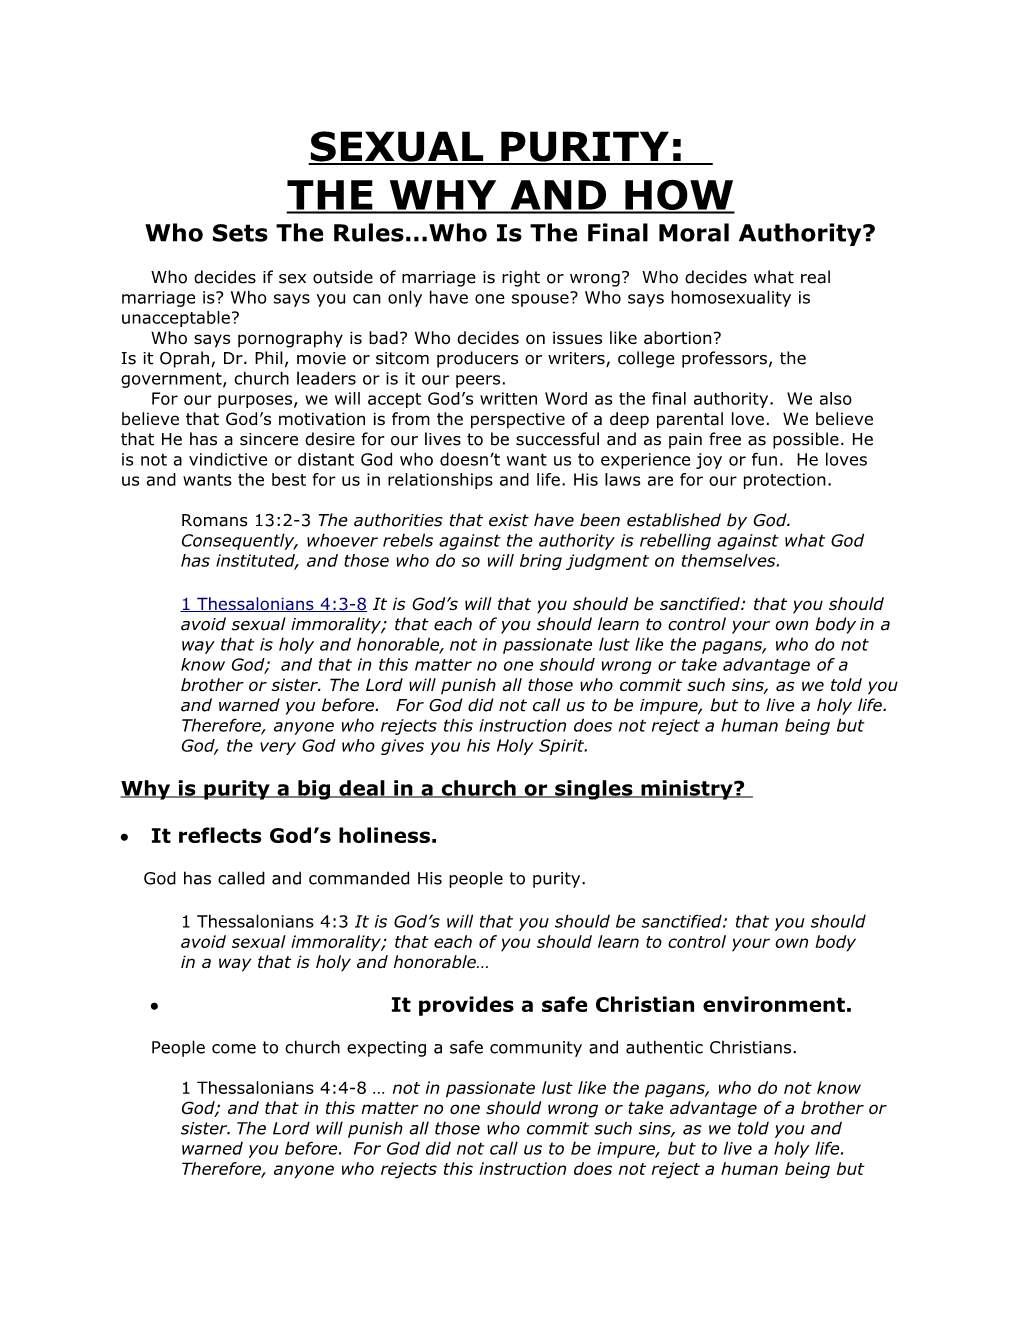 SEXUAL PURITY: the WHY and HOW Who Sets the Rules Who Is the Final Moral Authority?